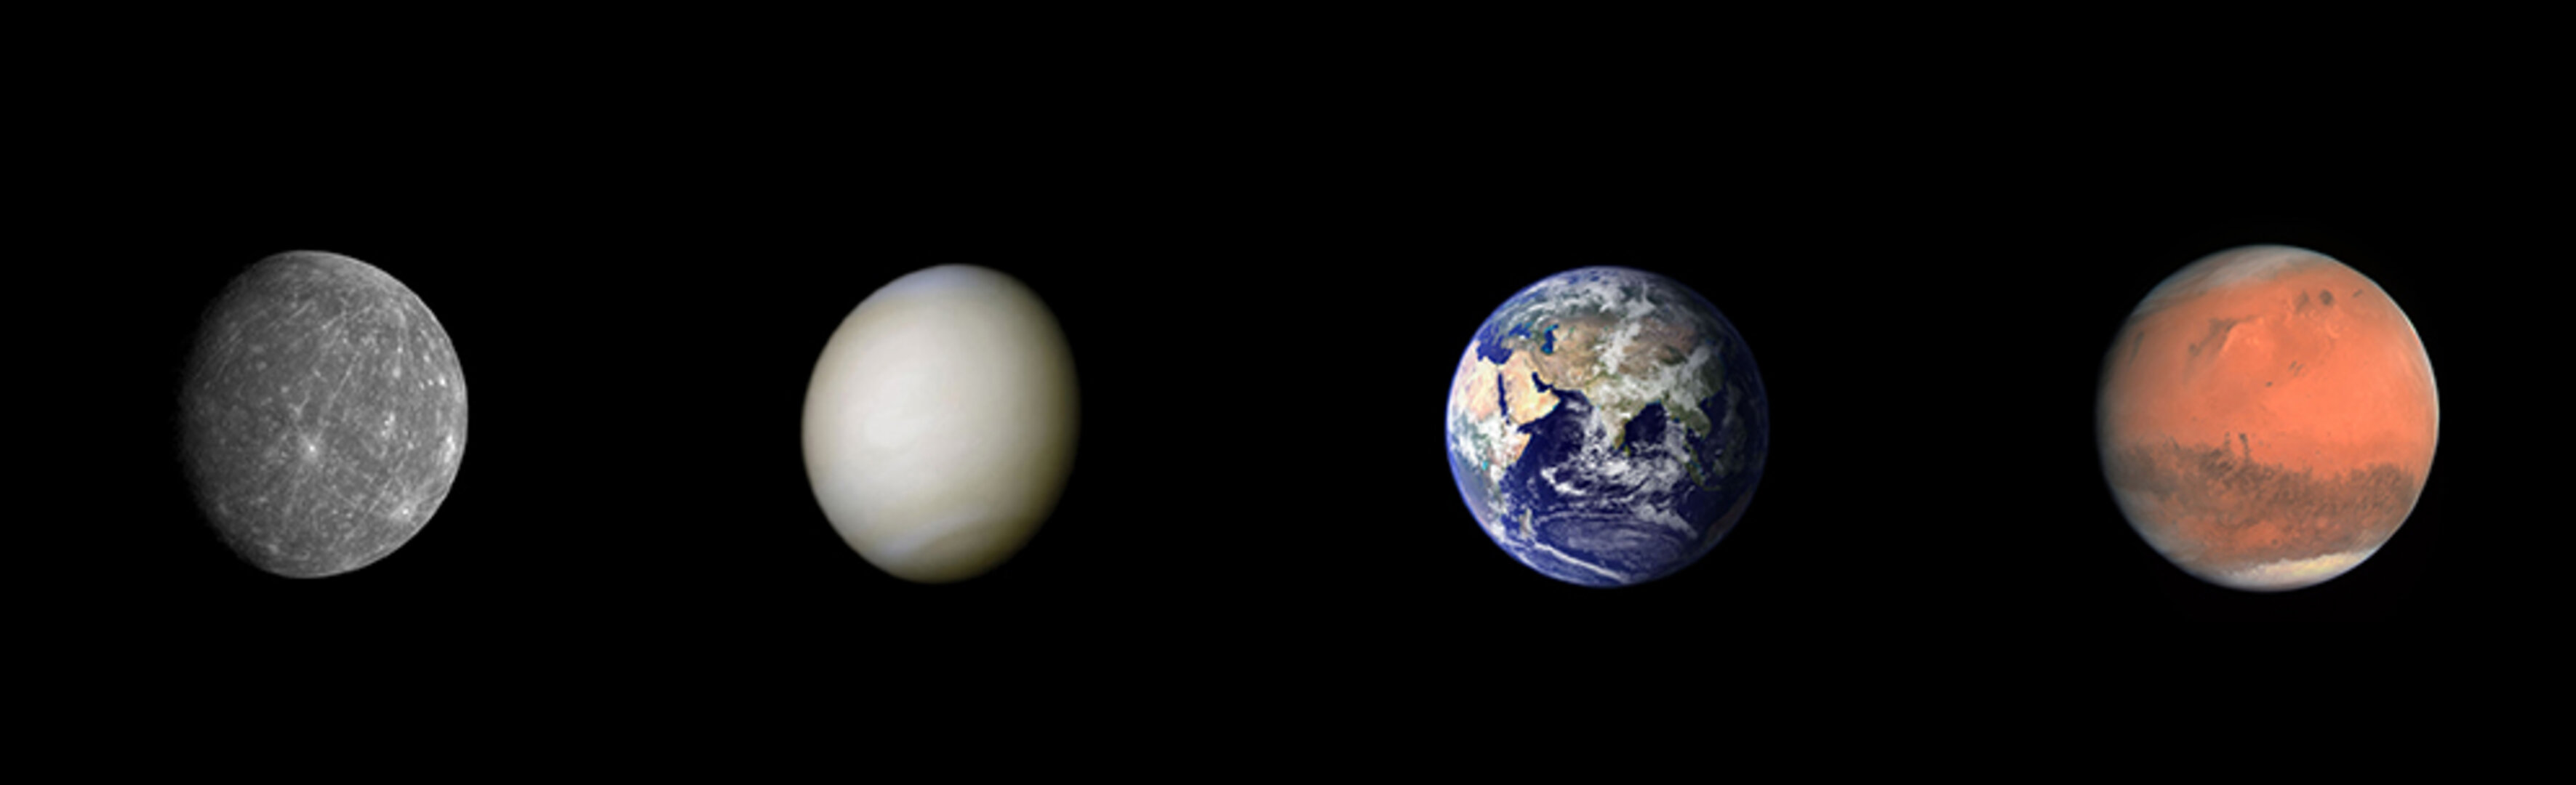 The inner (terrestrial) planets. The images shown here are not to scale. 